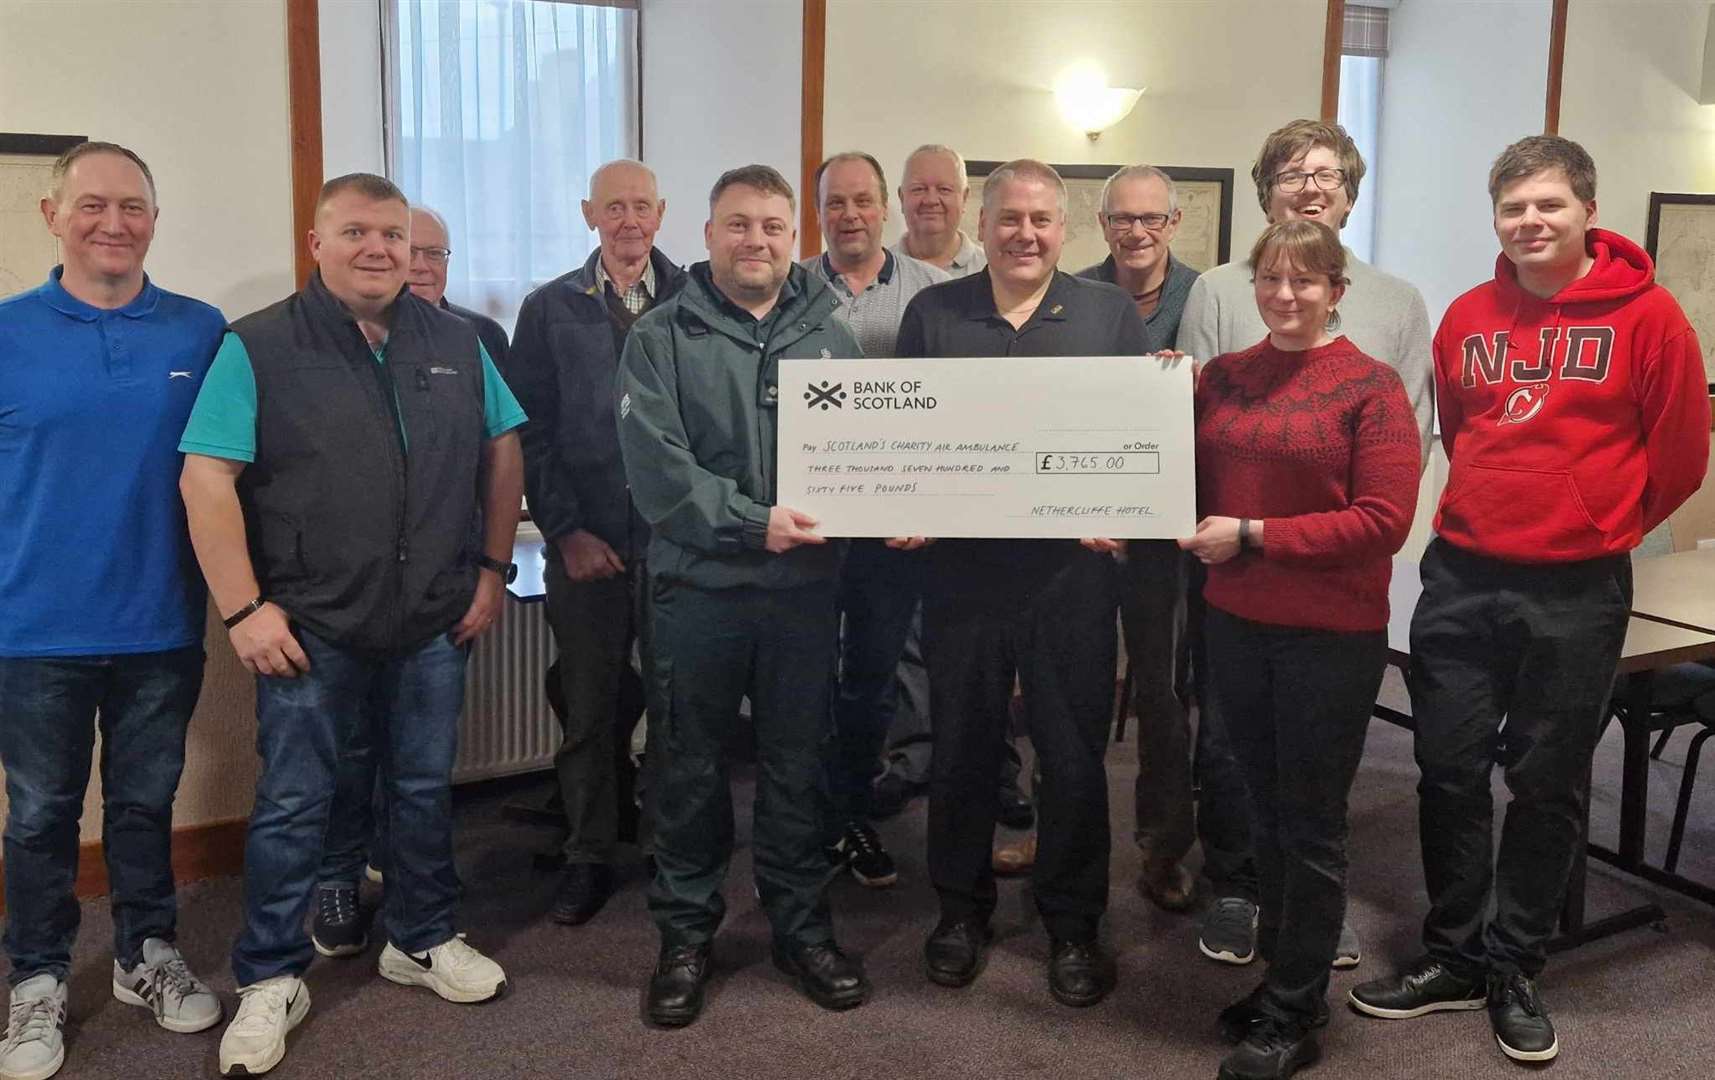 From left to right, Eifion Davies, George Duncan, Peter Gunn, David Forbes, Dominic Rigby, Kenneth Forbes, John Taylor, Mervyn Hill, Martin Duffy, Michael Hill, Ruth Falconer, Adam Hill as the Nethercliffe Hotel hands over a cheque to Scotland's Charity Air Ambulance.